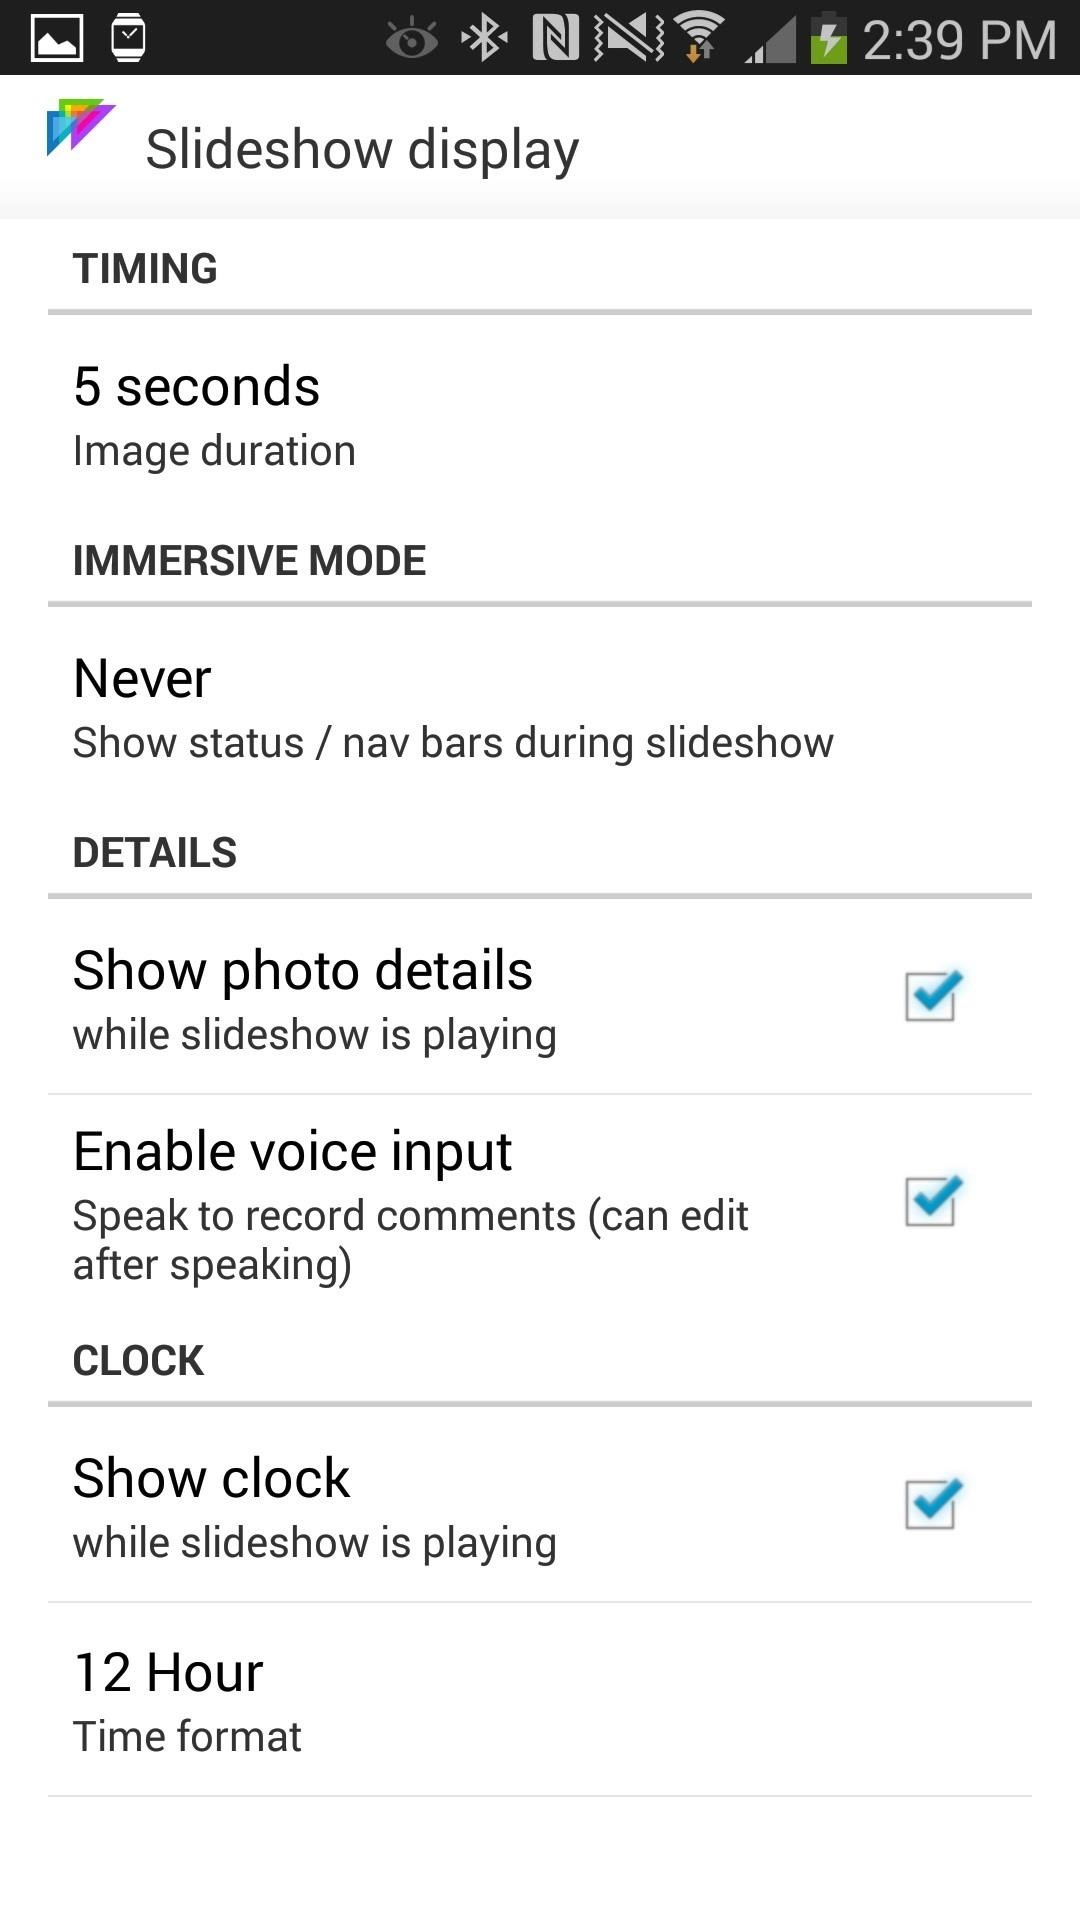 How to Turn Your Favorite Pics from Instagram, Tumblr, & More into Daydreams on Your Galaxy Note 3